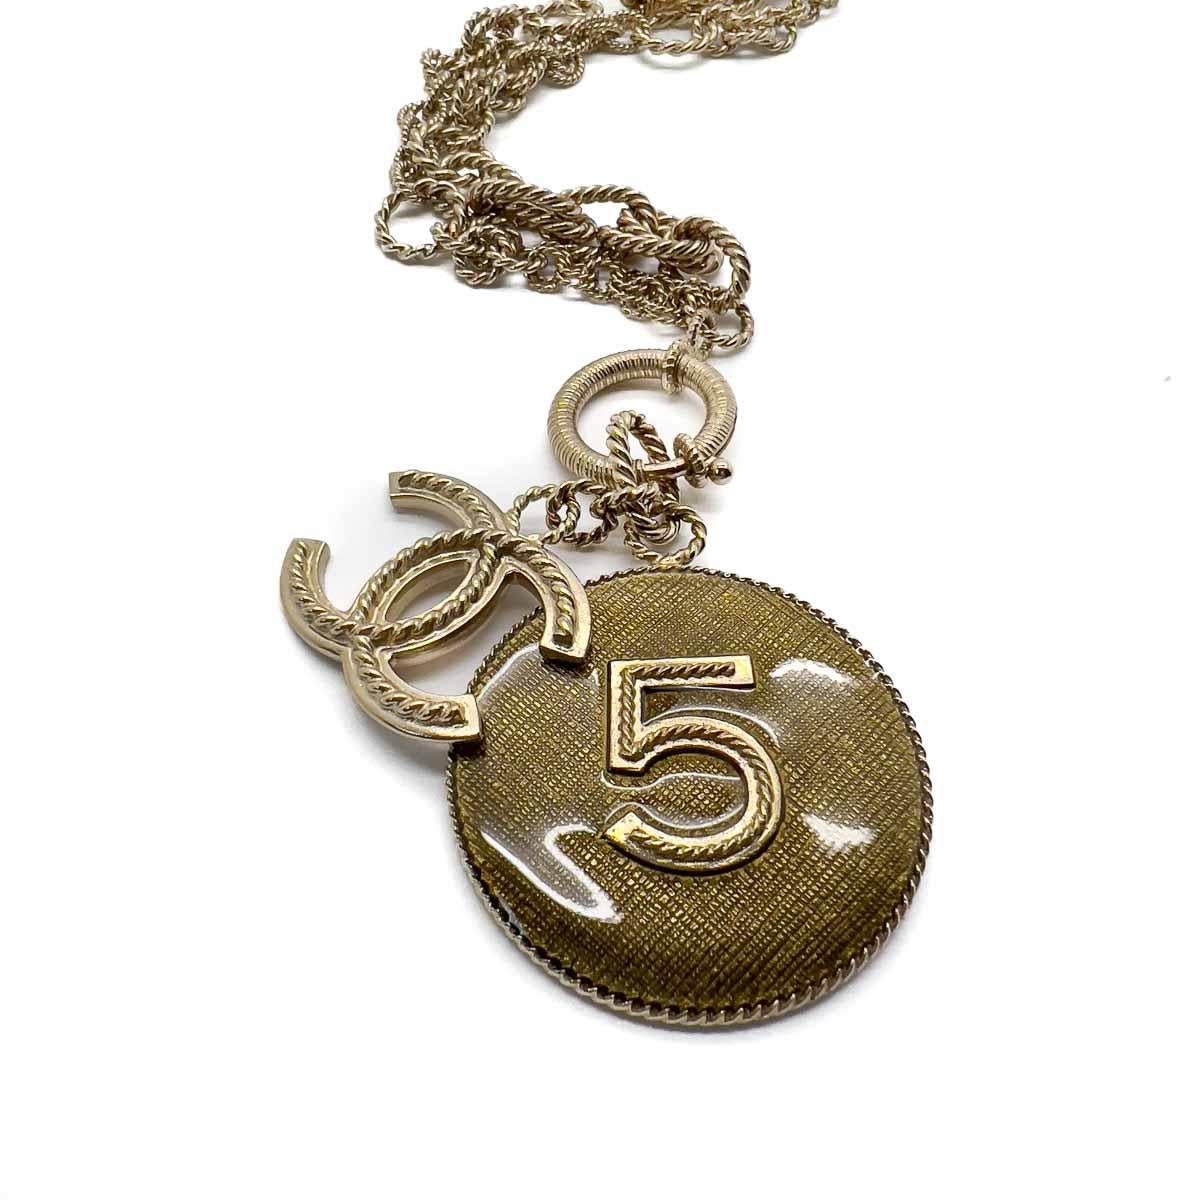 Vintage Chanel Statement No. 5 Rope Chain Charm Necklace 2013 For Sale 2